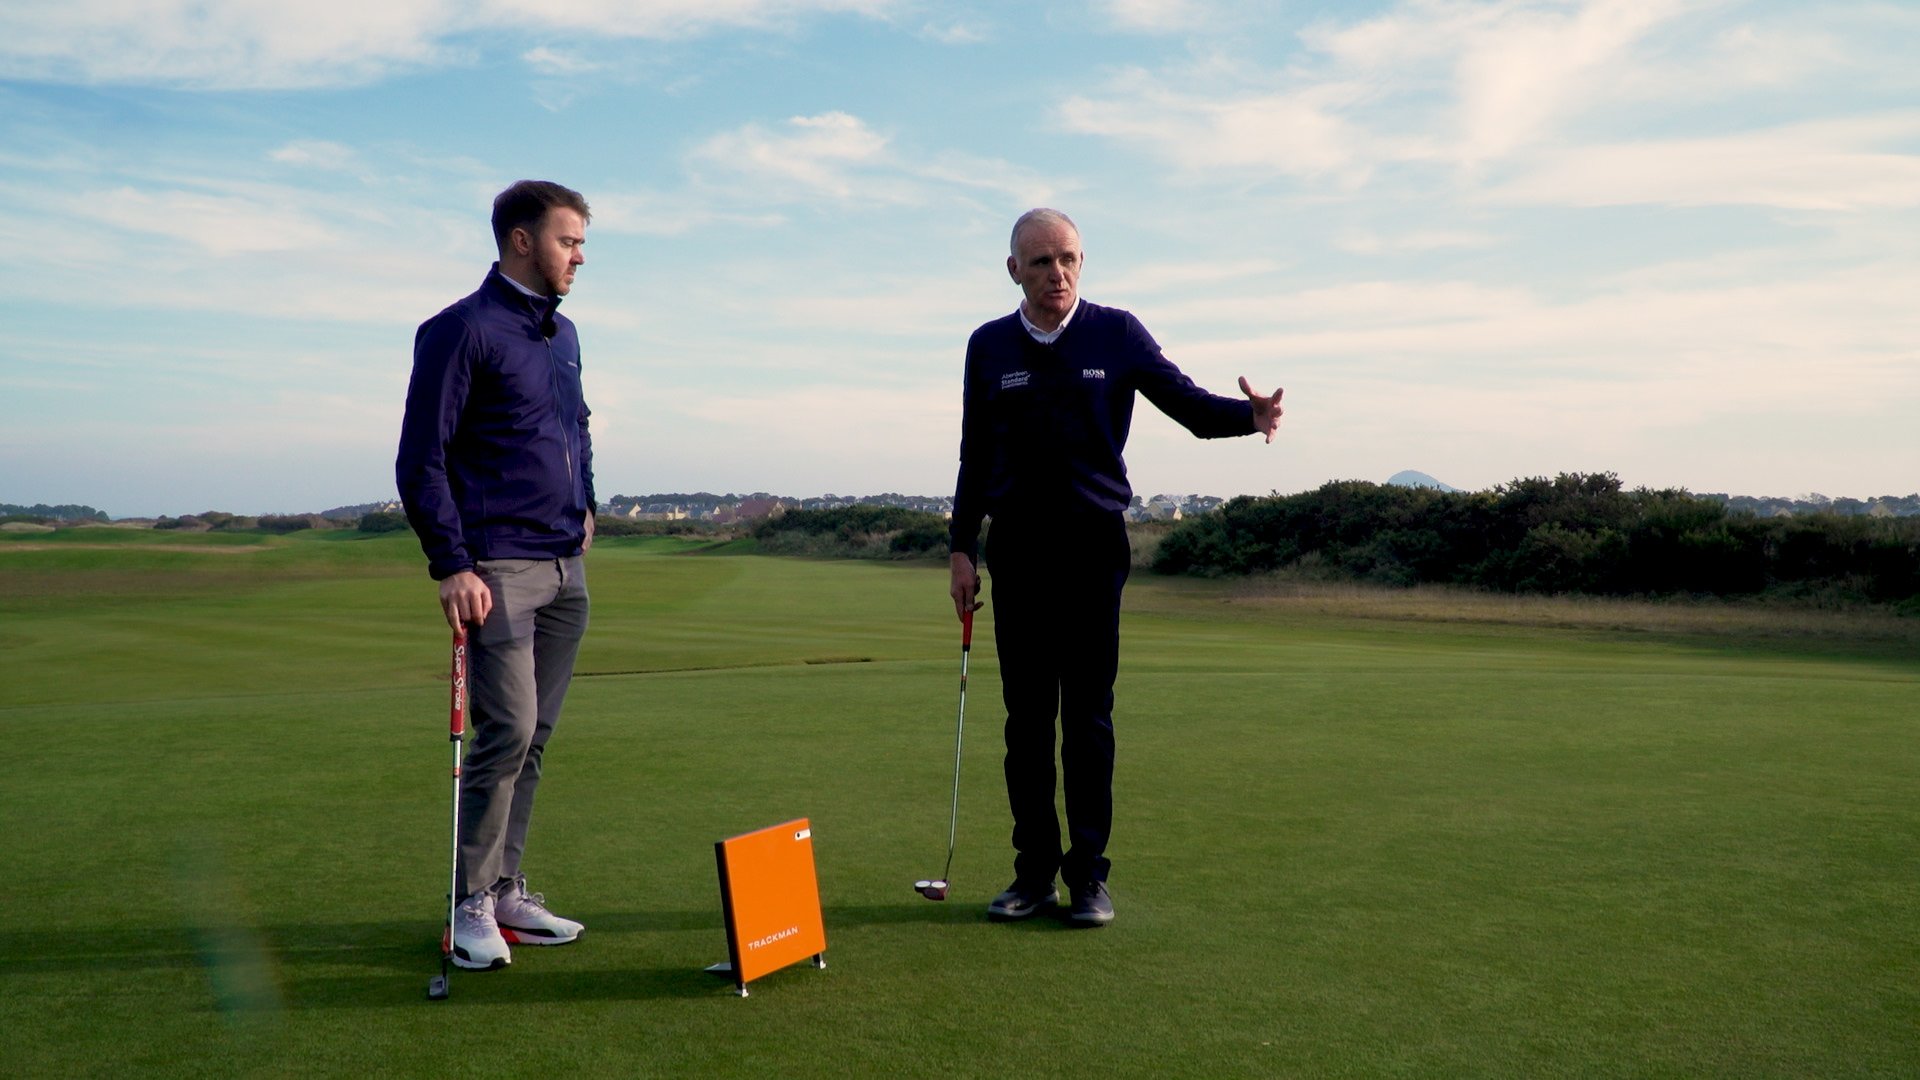 What is your skid and roll ratio? How to improve your putting with Trackman